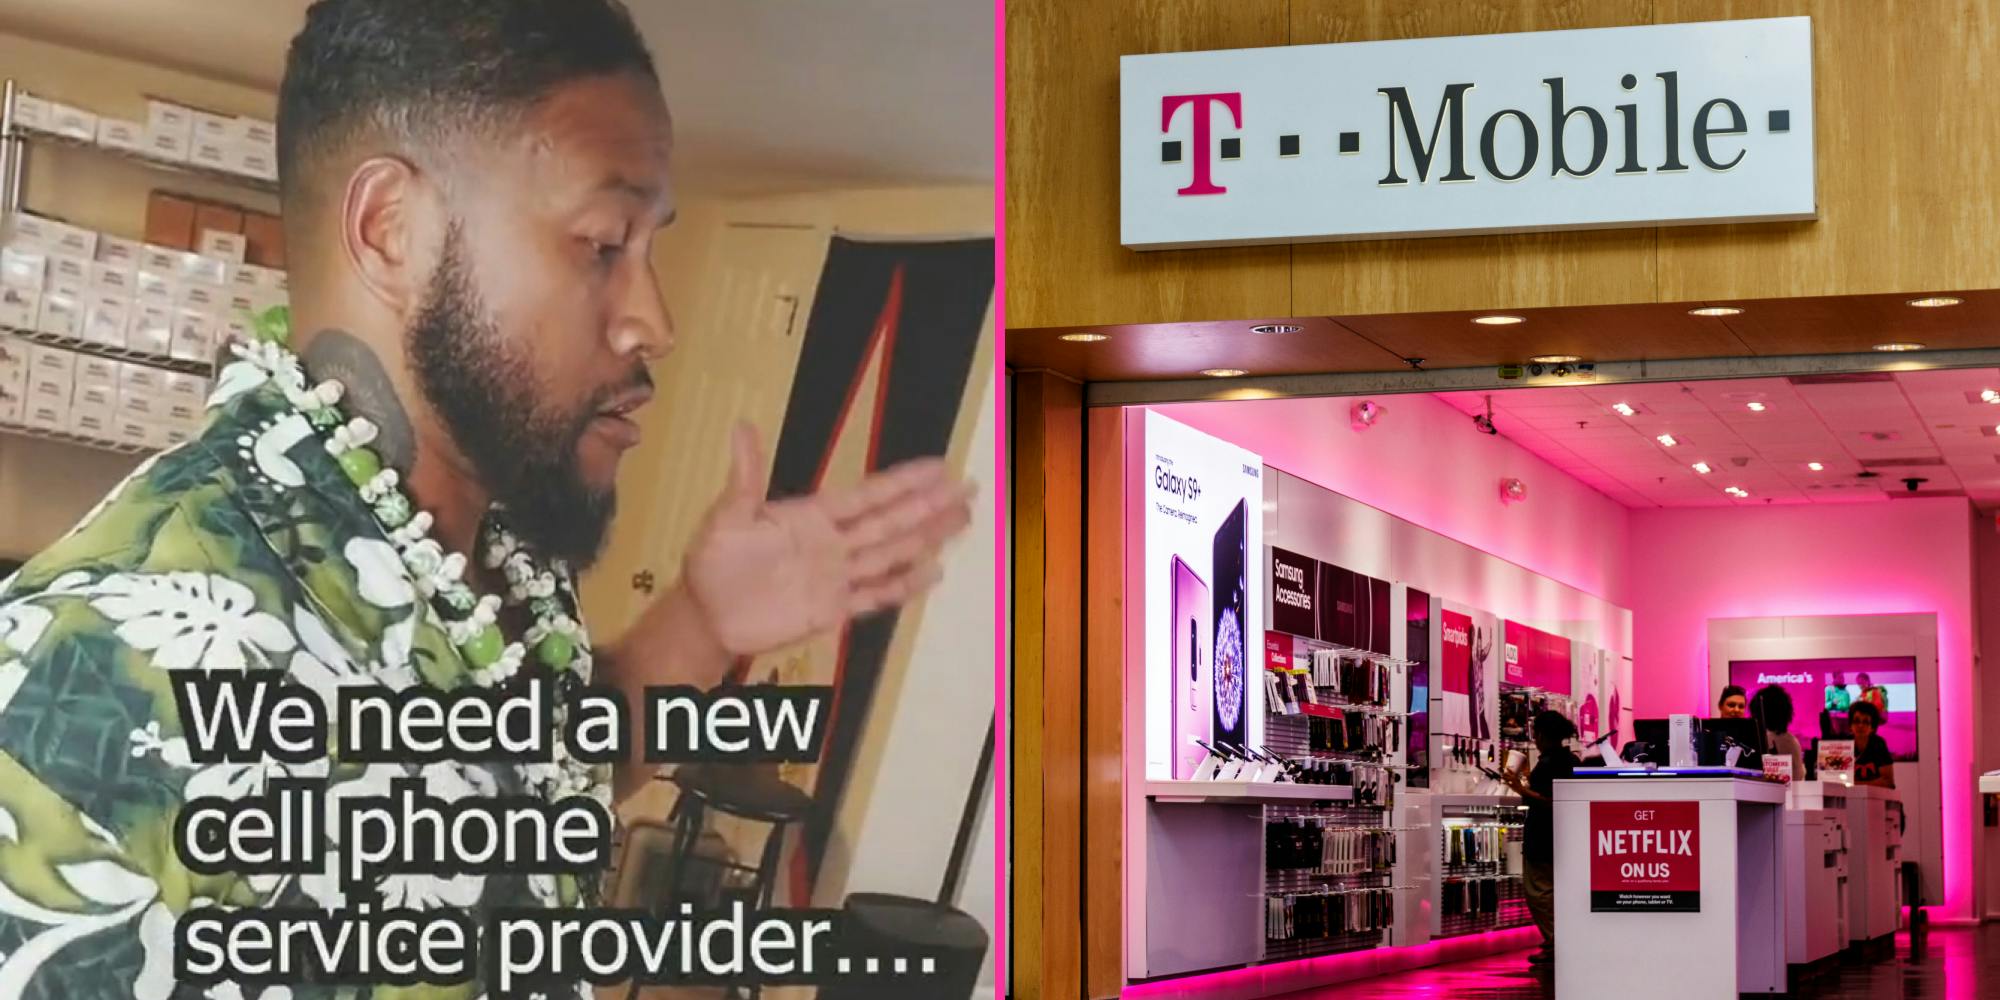 Man dancing like robot caption "We need a new cell phone service provider..." (l) T Mobile store interior with sign out front (r)